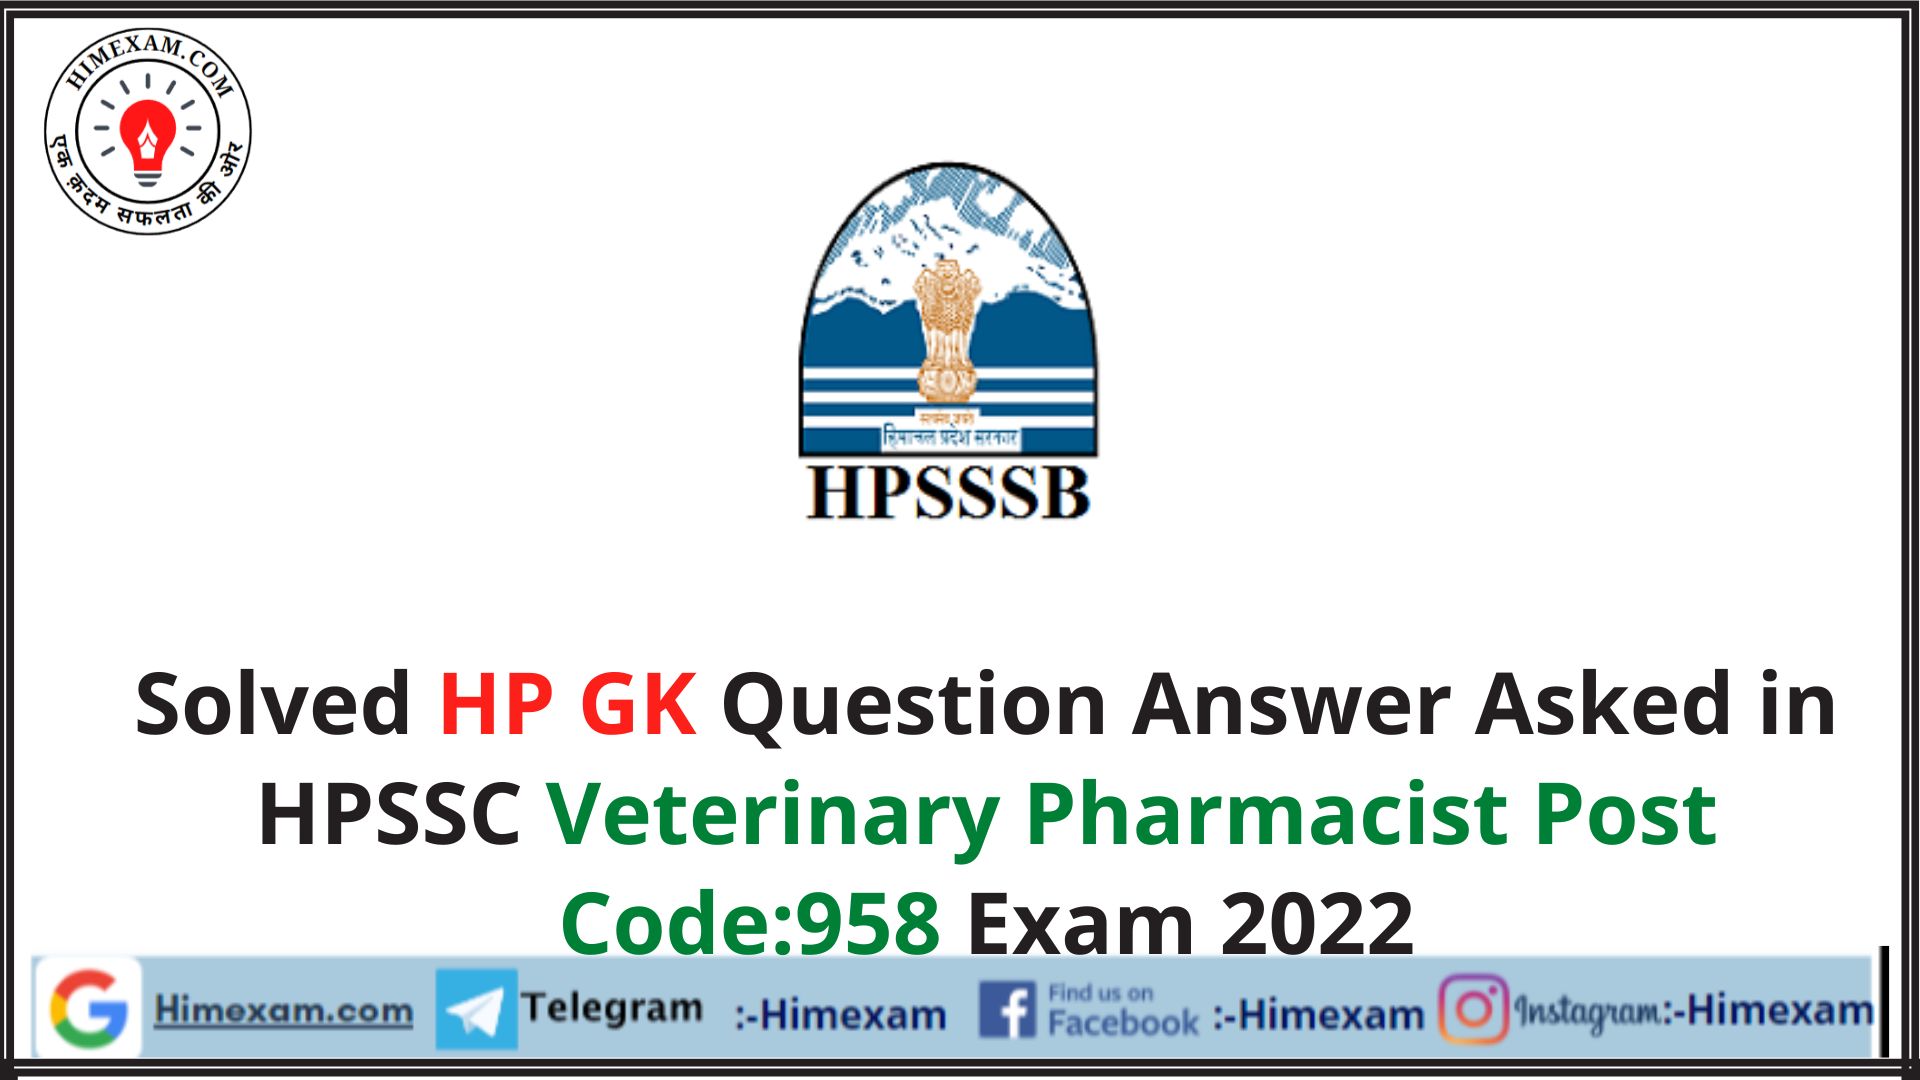 Solved HP GK Question Answer Asked in HPSSC Veterinary Pharmacist Post Code:958 Exam 2022